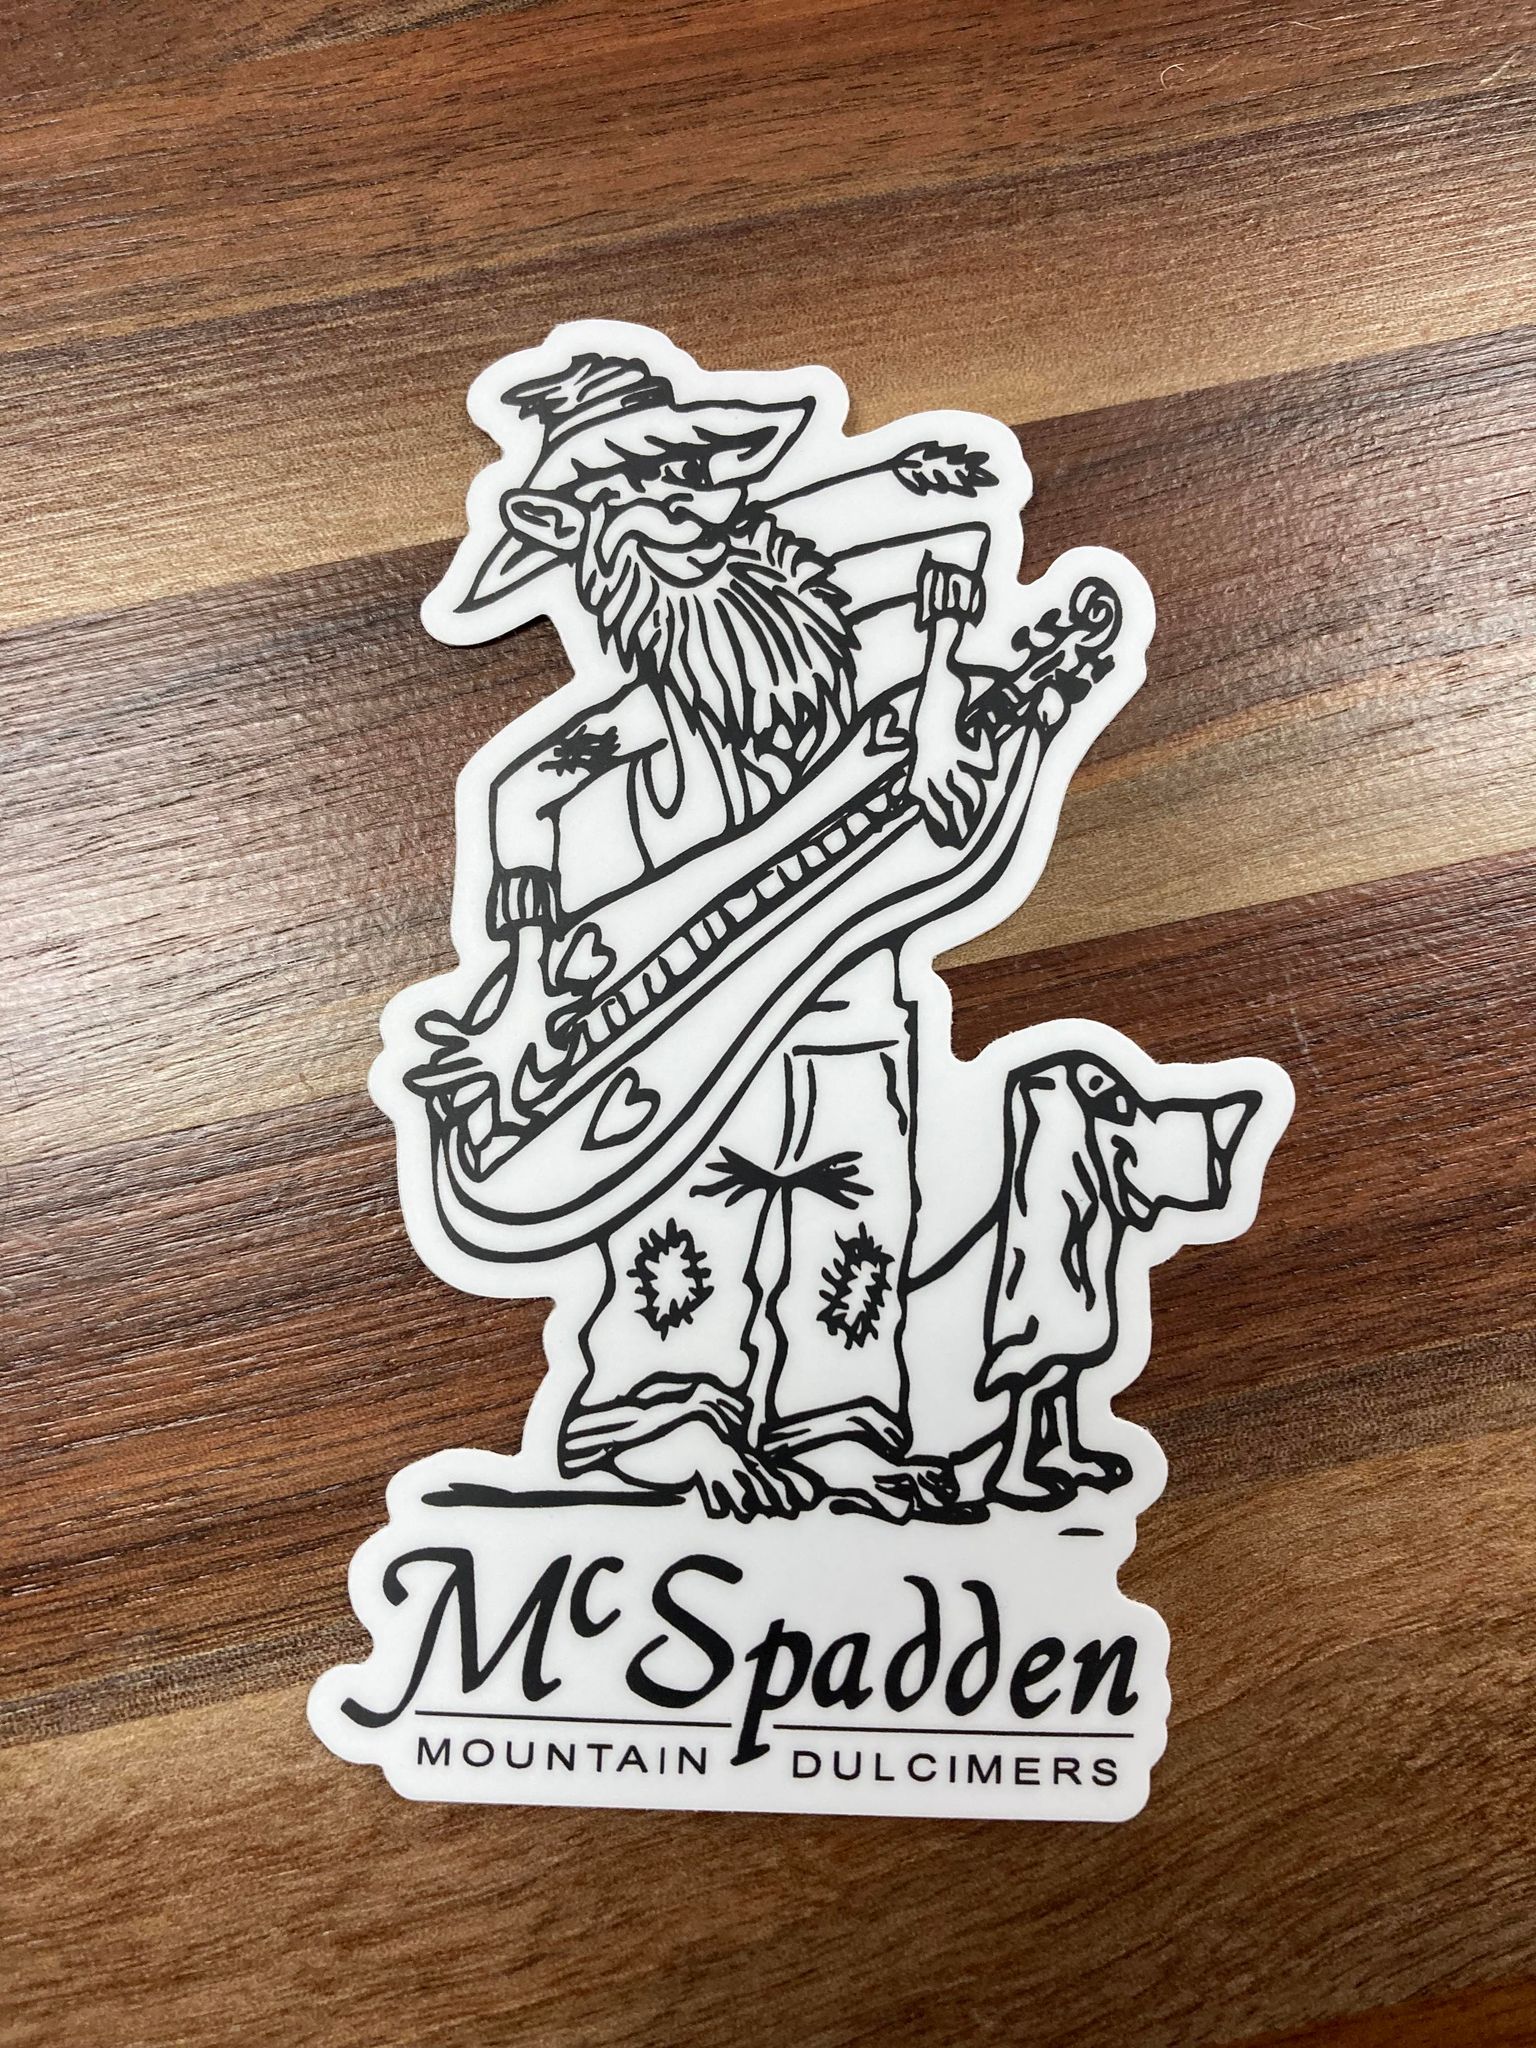 Sentence with product name: McSpadden Stickers depicting a caricature of a bearded figure with a mountain dulcimer and a dog, perfect for decorating laptops.